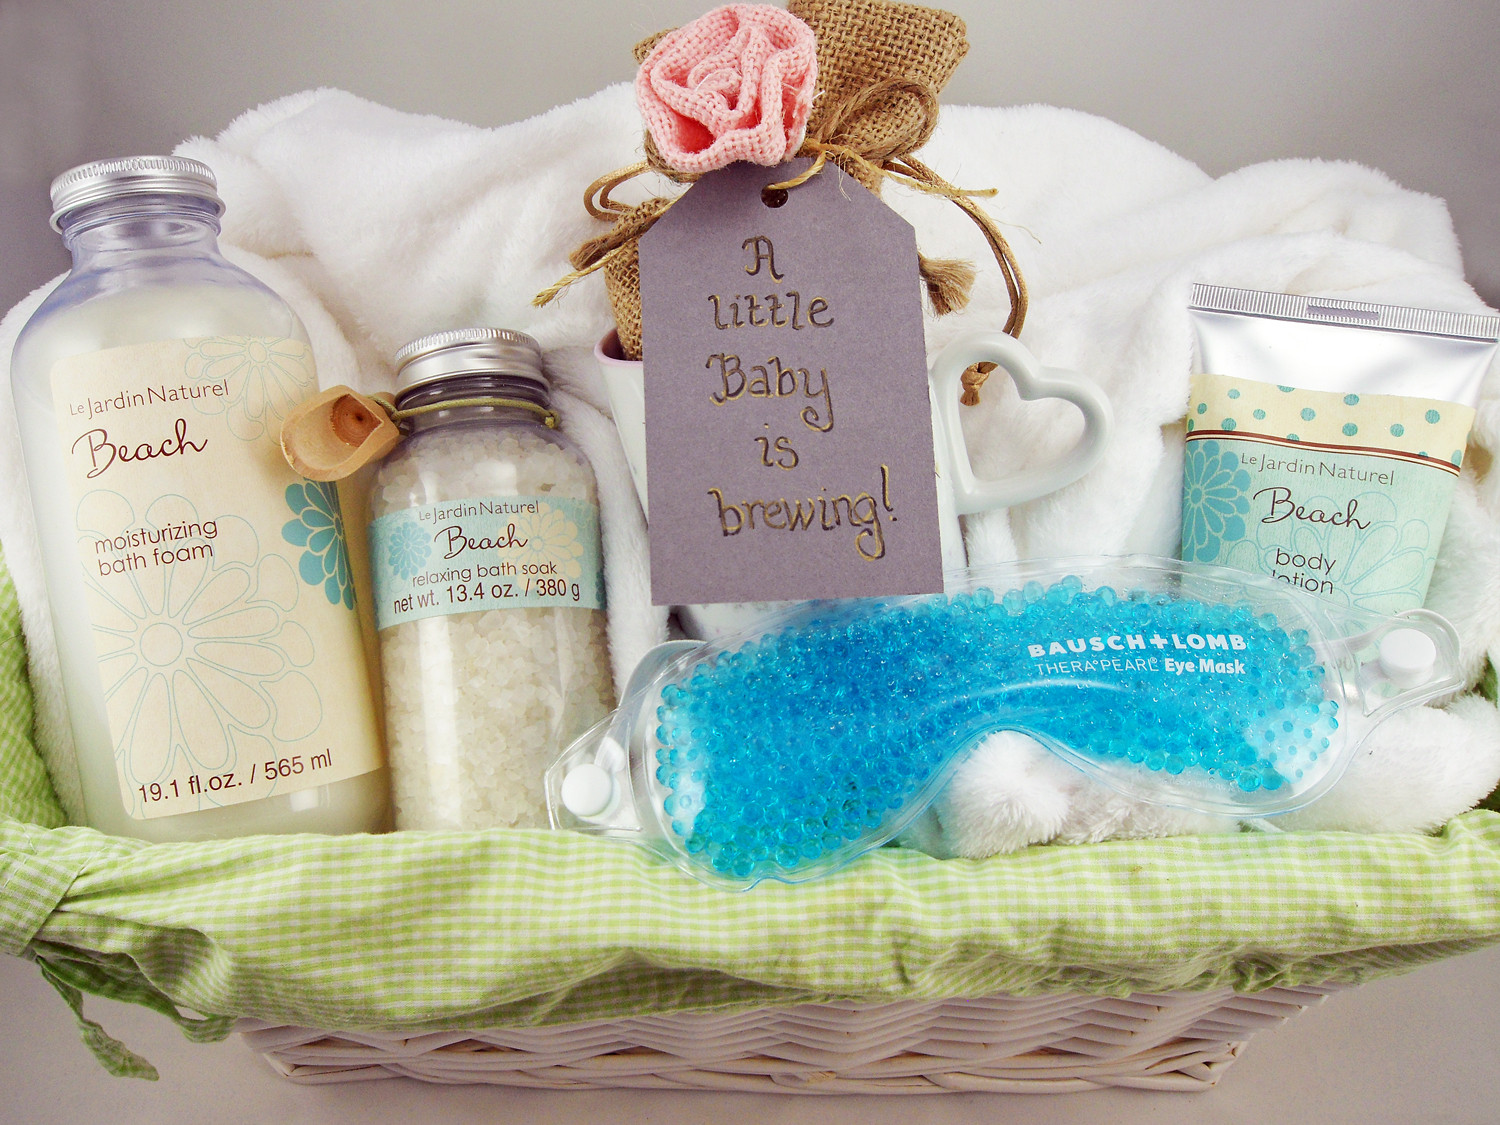 Ideas For New Baby Gift
 Expecting Couples Love These Unique Personalized Baby Gifts